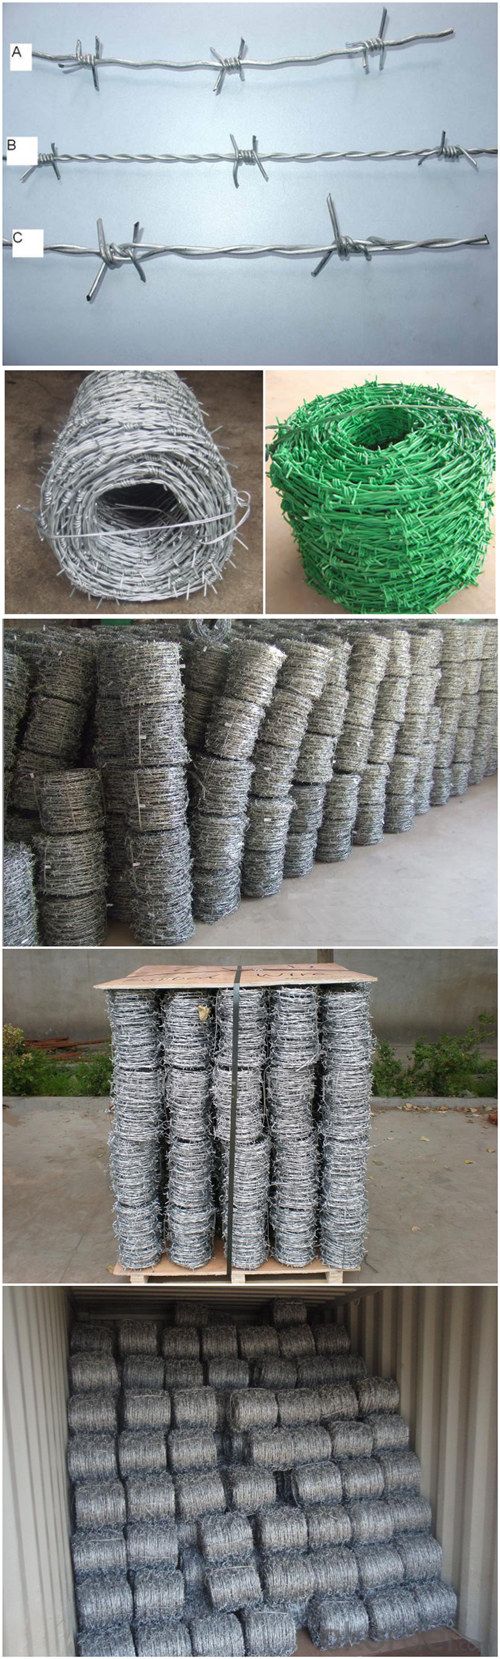 China Manufacturer of Galvanized Barbed Wire